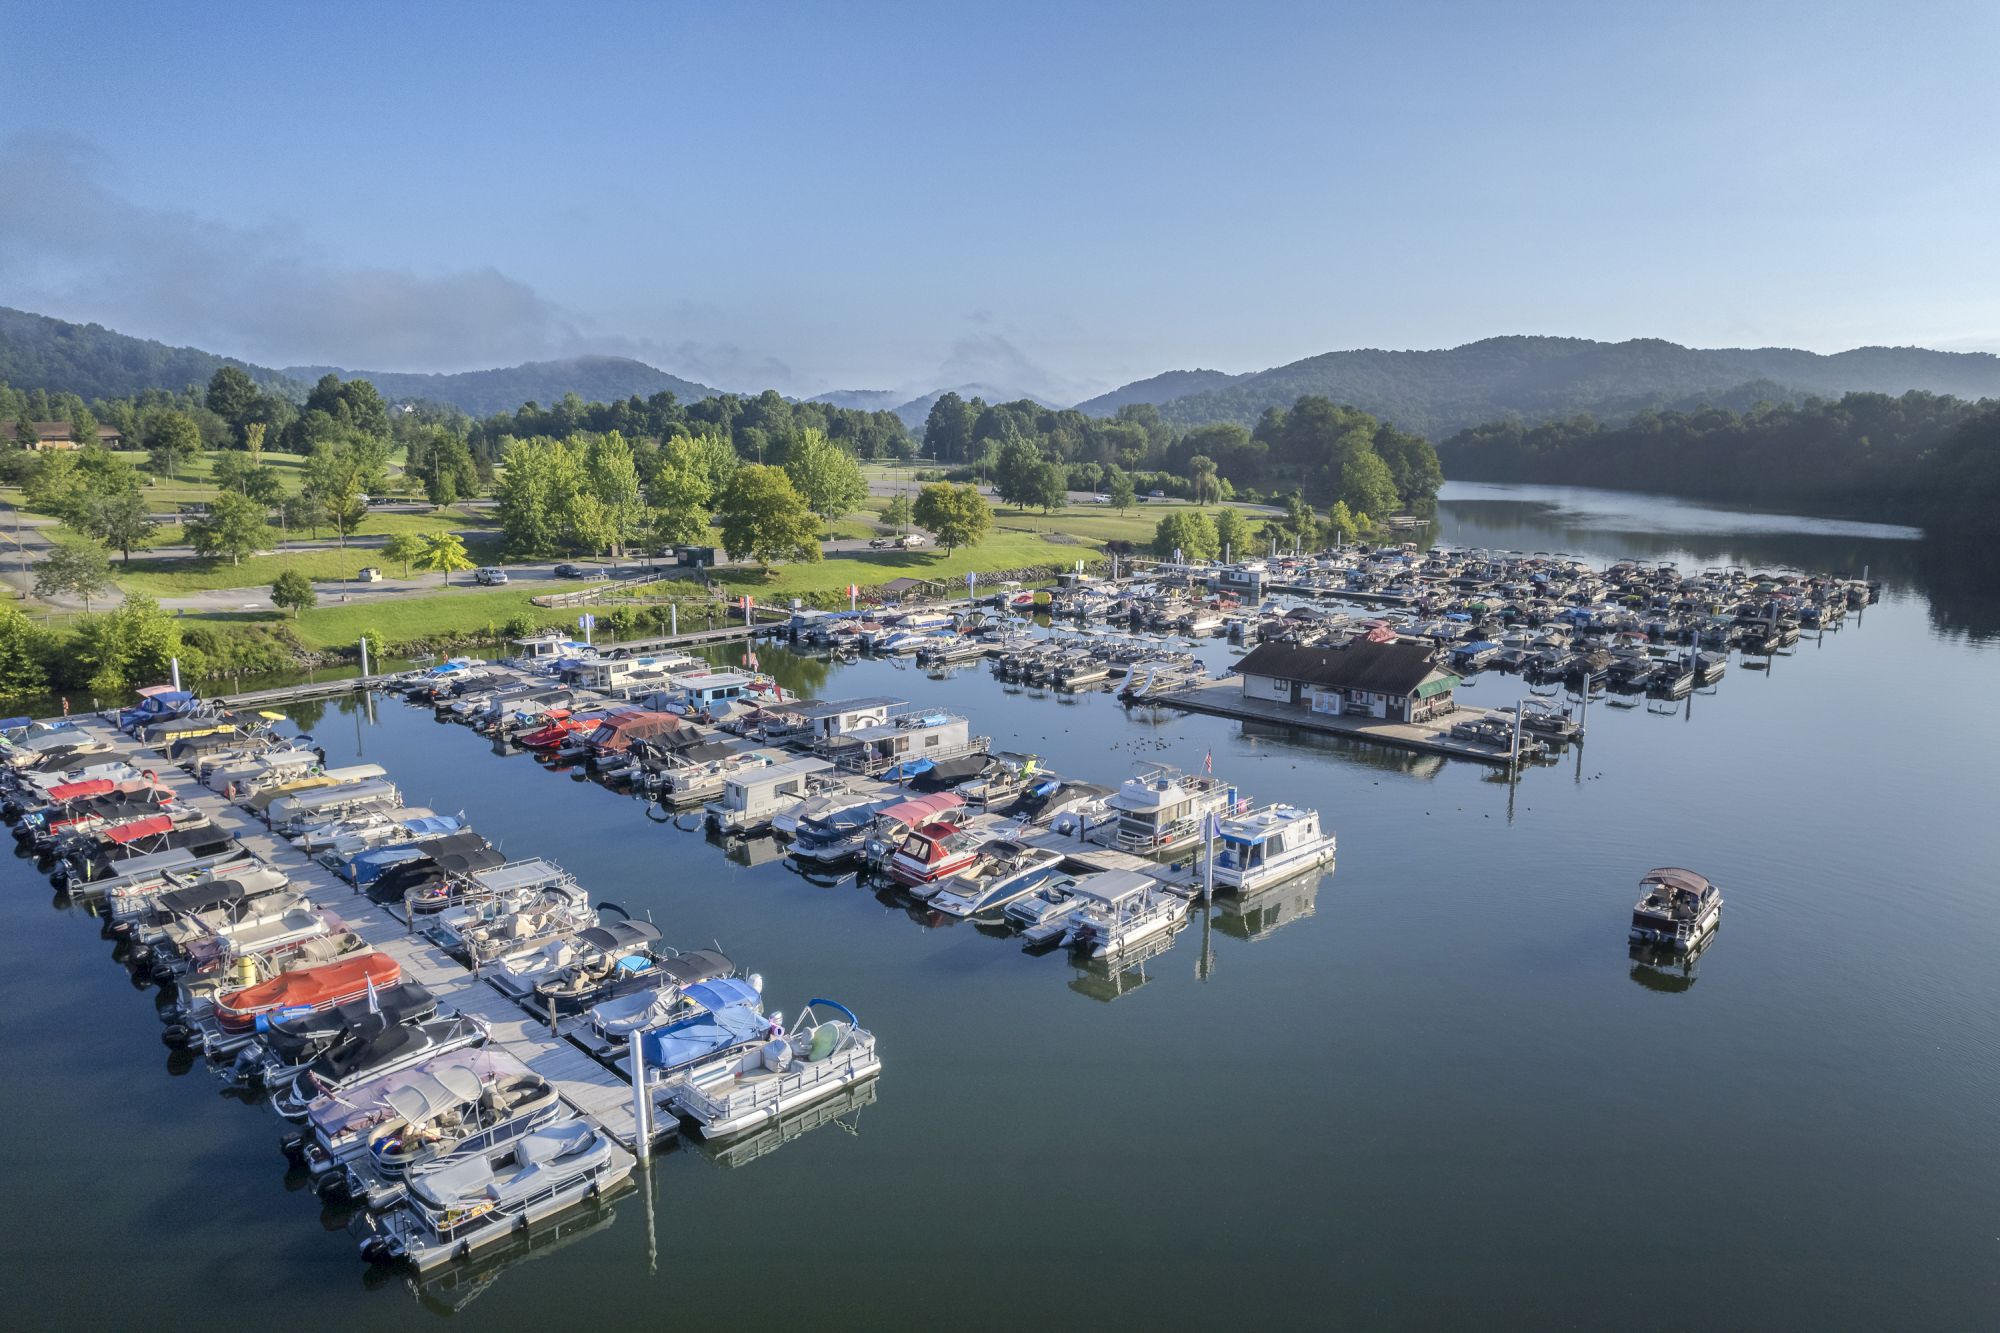 An aerial view of a marina with numerous boats docked in a calm, scenic body of water surrounded by green trees and distant hills.